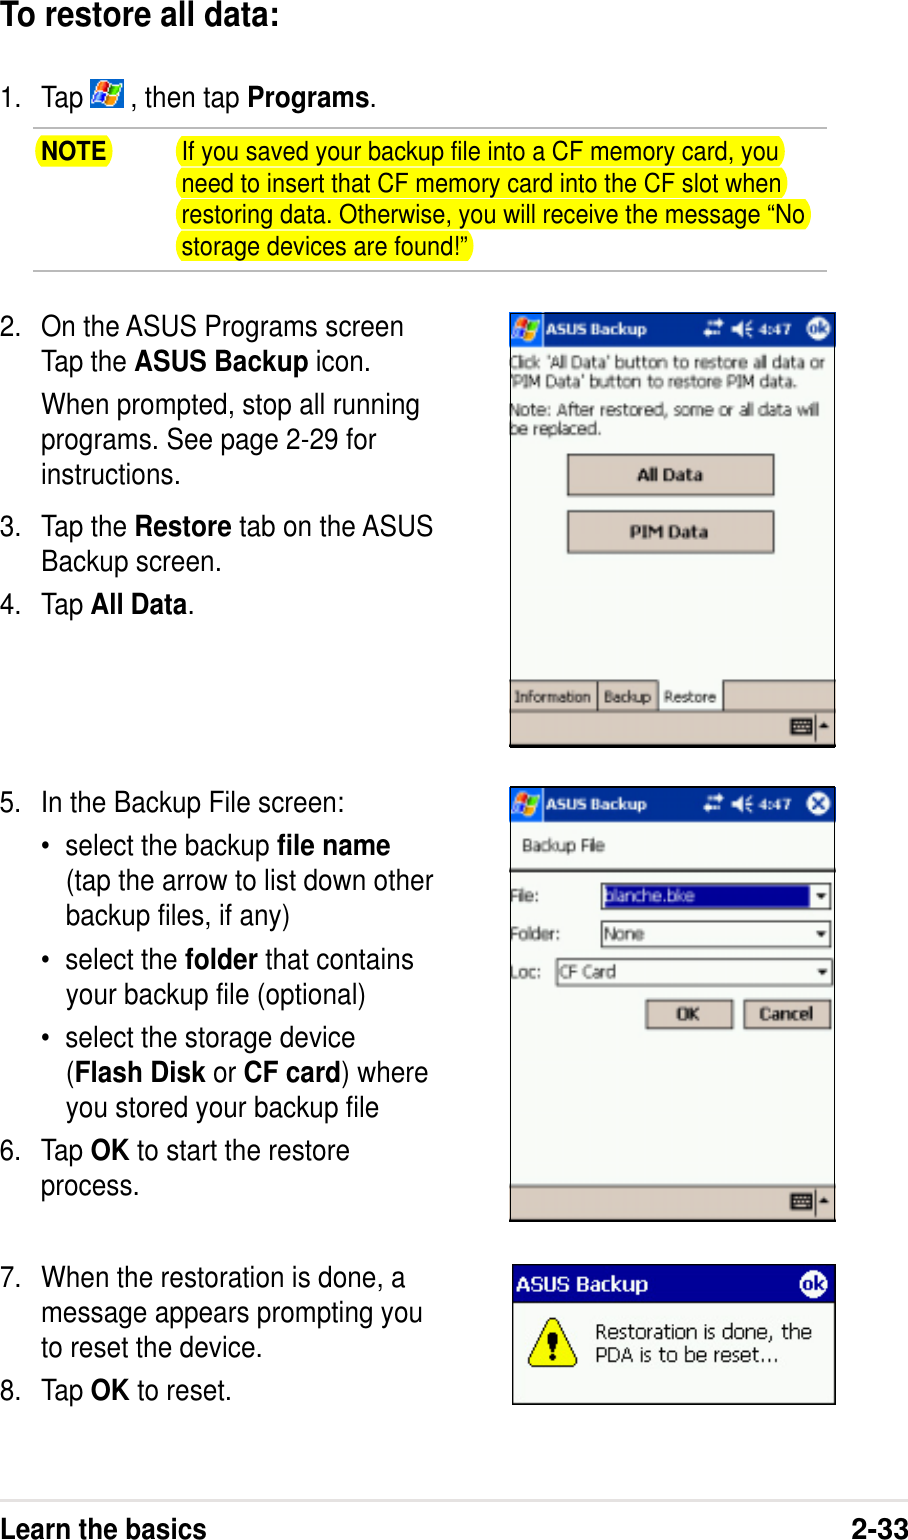 Learn the basics2-33To restore all data:1. Tap   , then tap Programs.NOTE If you saved your backup file into a CF memory card, youneed to insert that CF memory card into the CF slot whenrestoring data. Otherwise, you will receive the message “Nostorage devices are found!”2. On the ASUS Programs screenTap the ASUS Backup icon.When prompted, stop all runningprograms. See page 2-29 forinstructions.3. Tap the Restore tab on the ASUSBackup screen.4. Tap All Data.5. In the Backup File screen:•select the backup file name(tap the arrow to list down otherbackup files, if any)•select the folder that containsyour backup file (optional)•select the storage device(Flash Disk or CF card) whereyou stored your backup file6. Tap OK to start the restoreprocess.7. When the restoration is done, amessage appears prompting youto reset the device.8. Tap OK to reset.